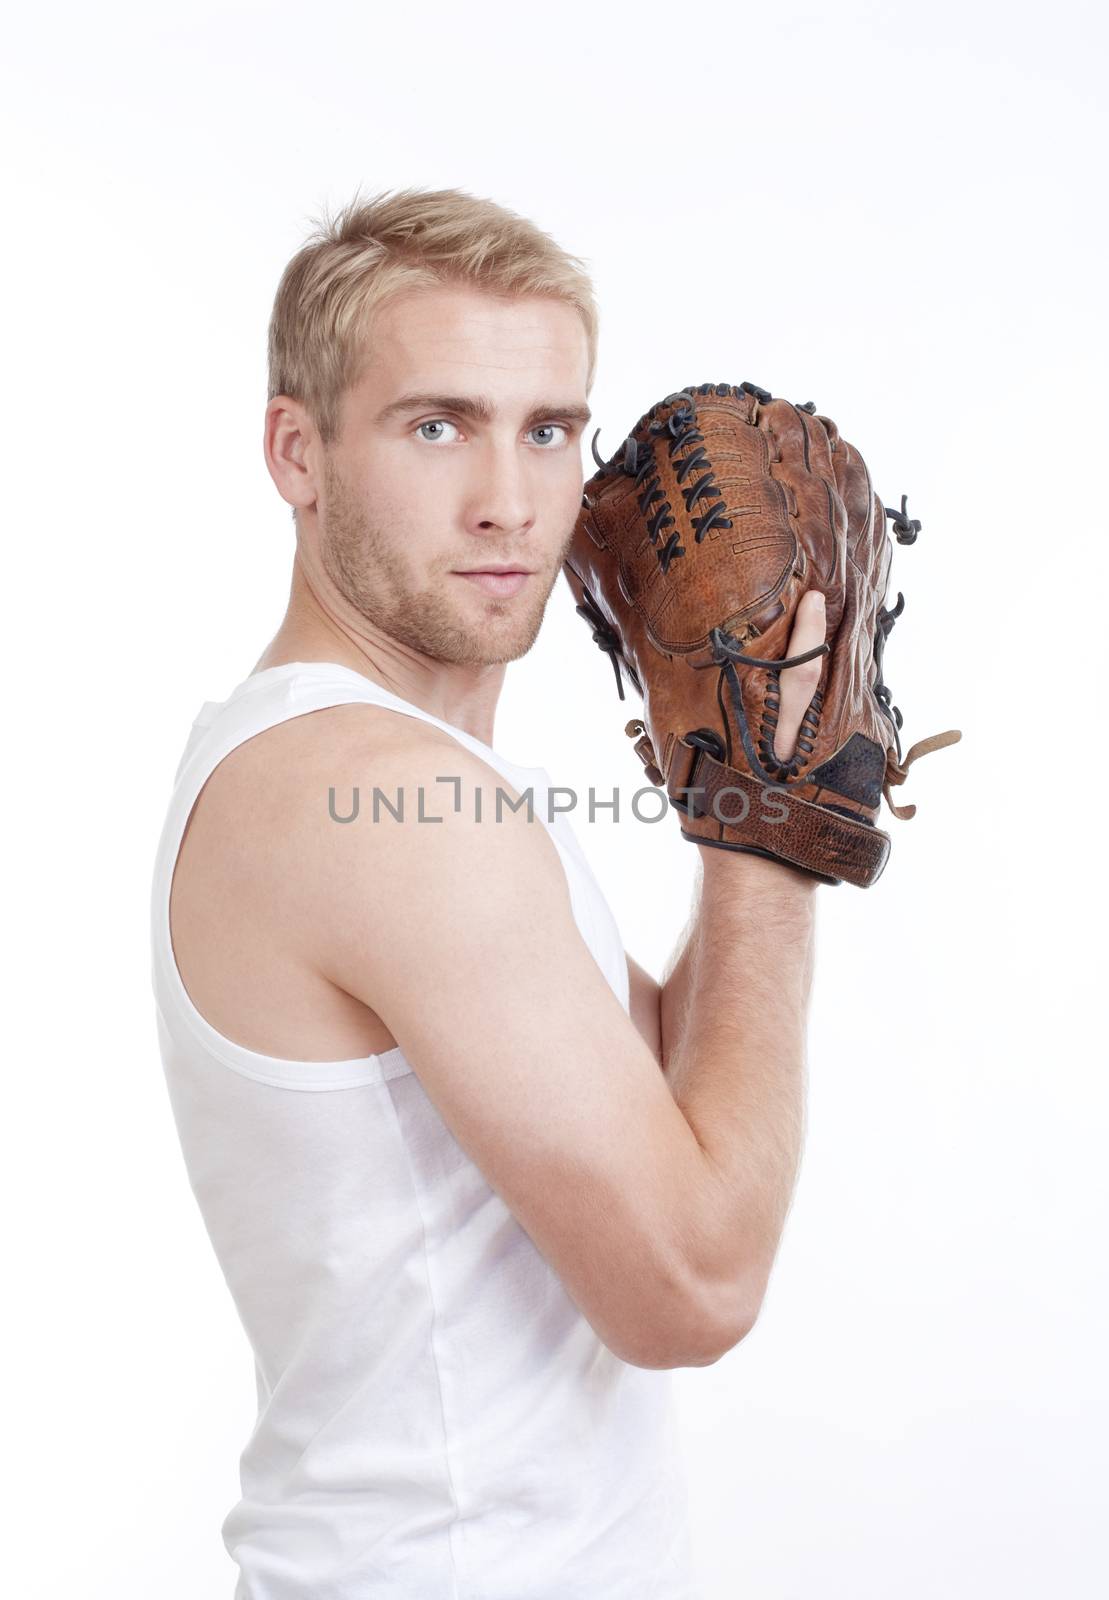 man in white top with baseball glove looking into camera - isolated on white